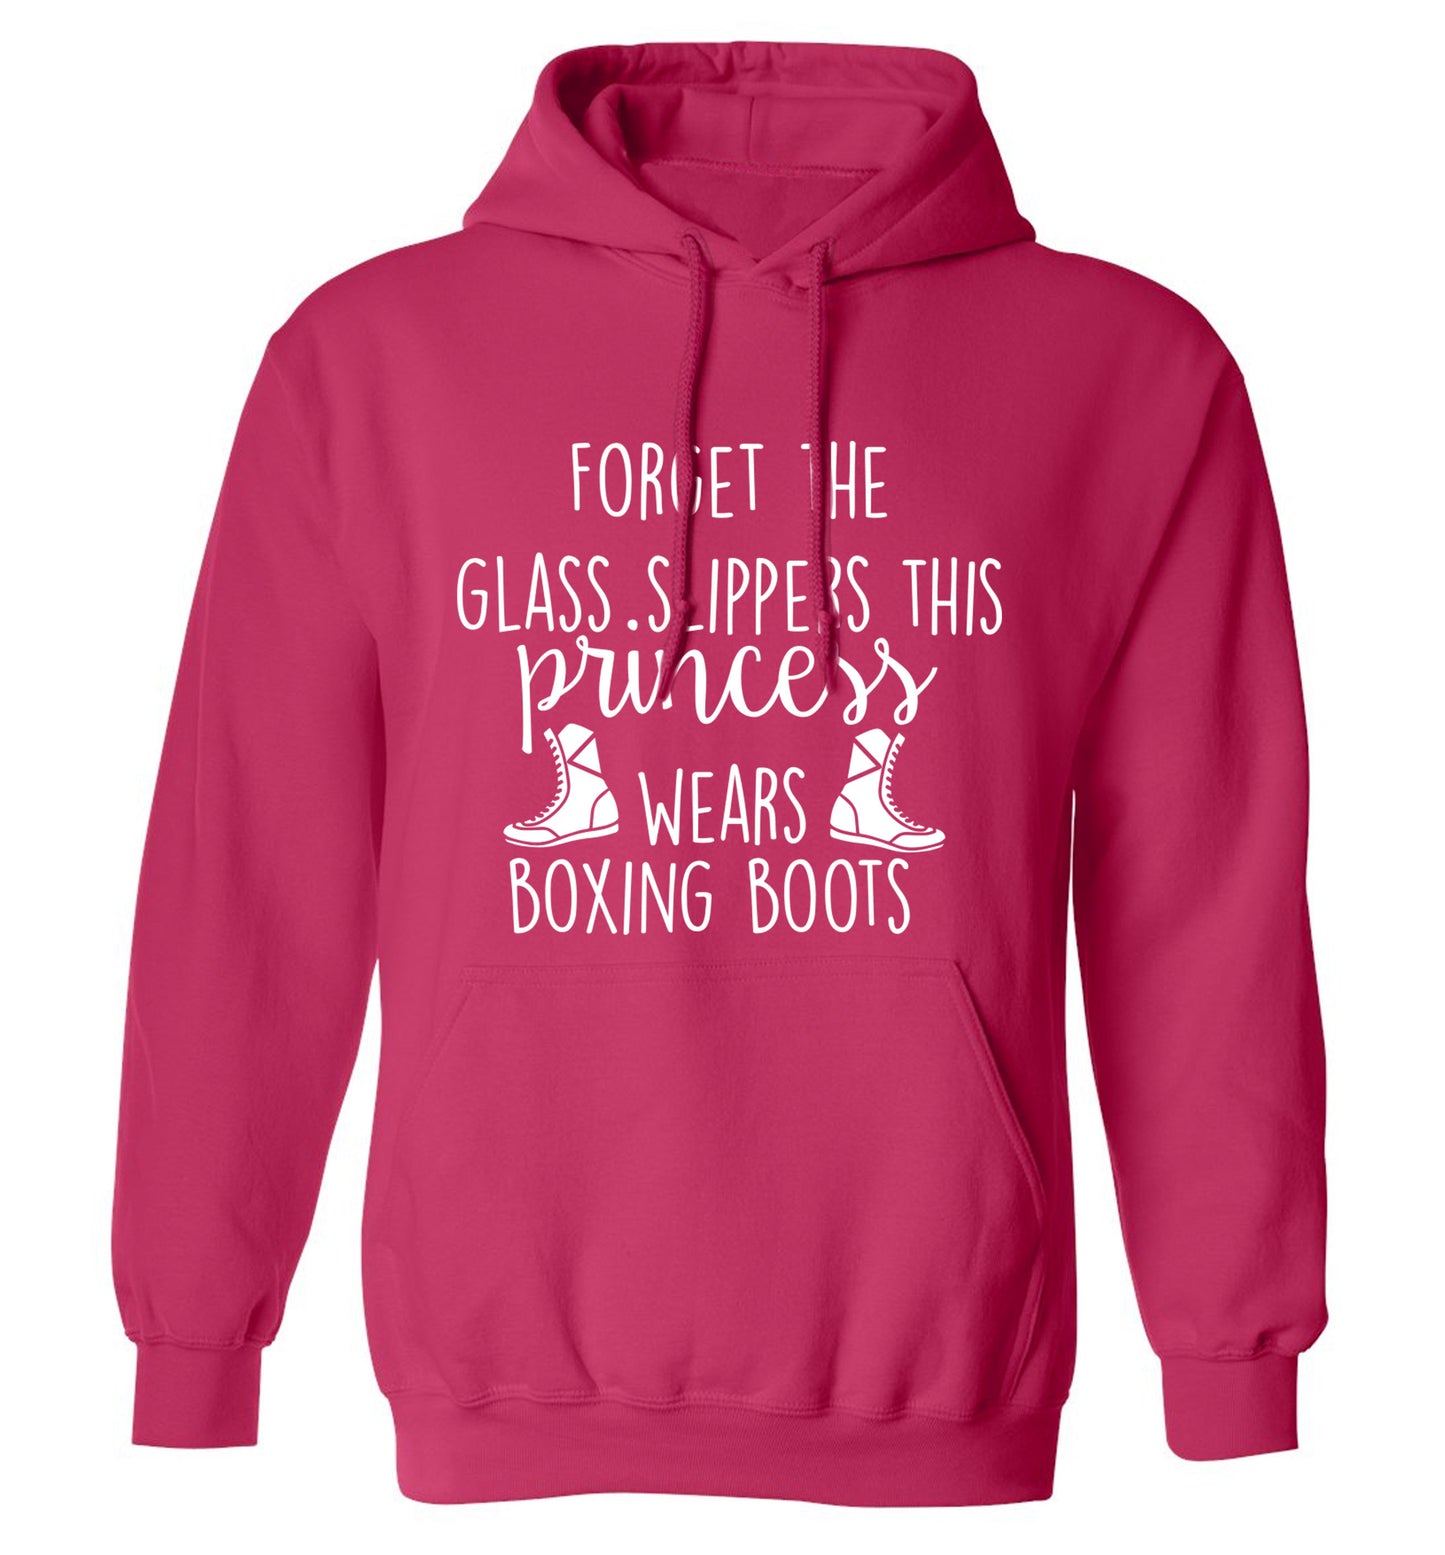 Forget the glass slippers this princess wears boxing boots adults unisex pink hoodie 2XL